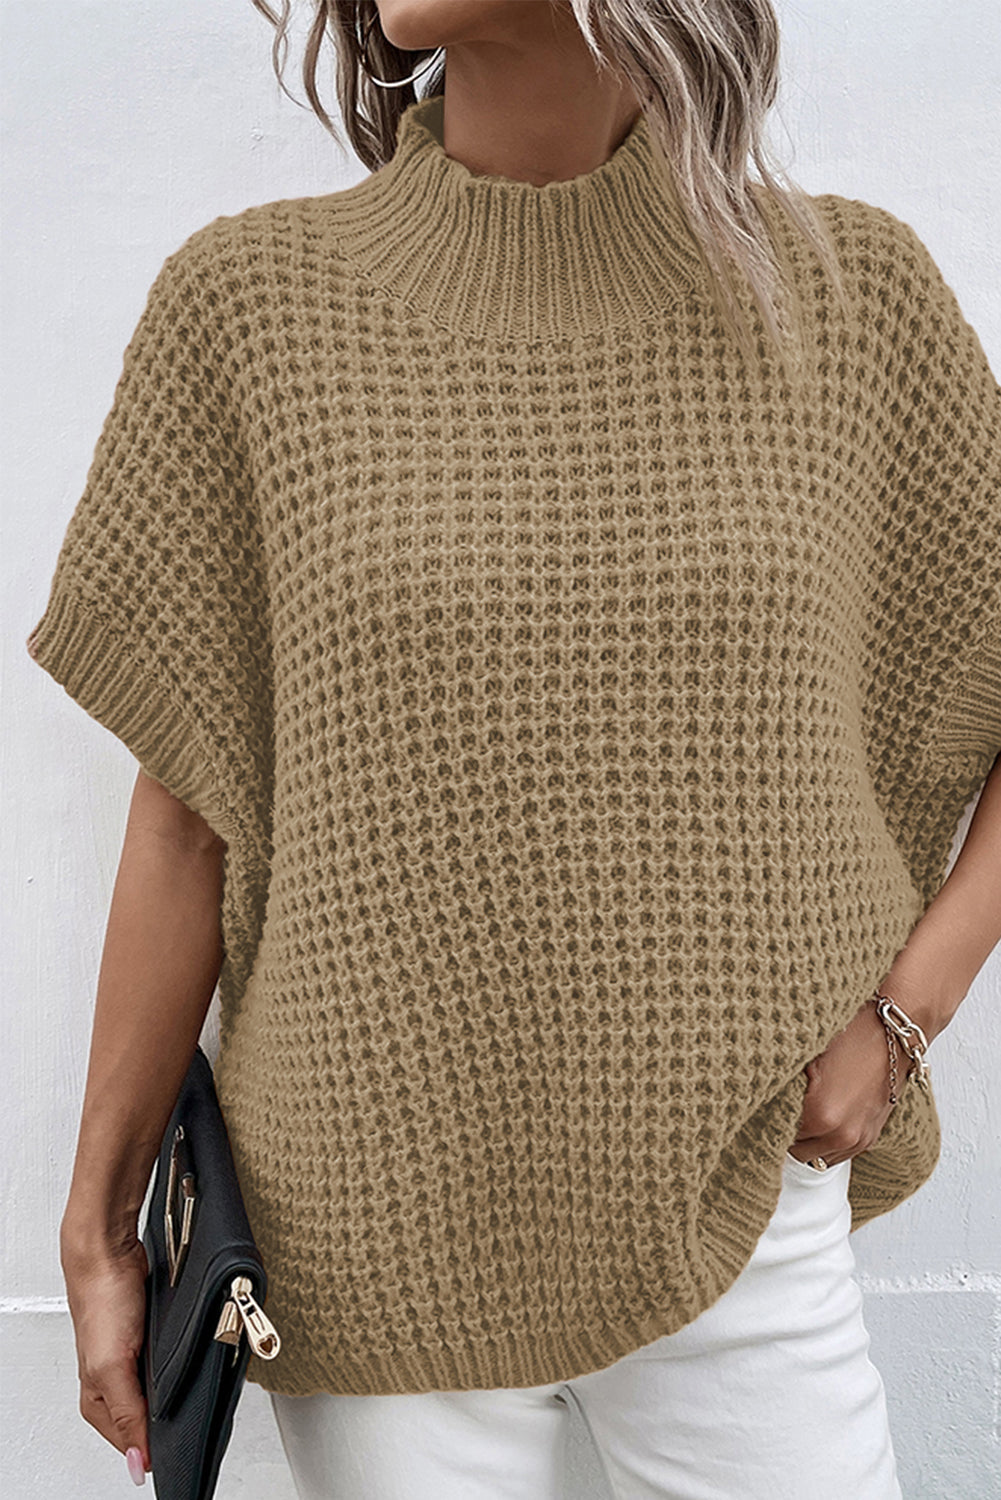 Light French Beige High Neck Short Batwing Sleeve Textured Knit Sweater OniTakai